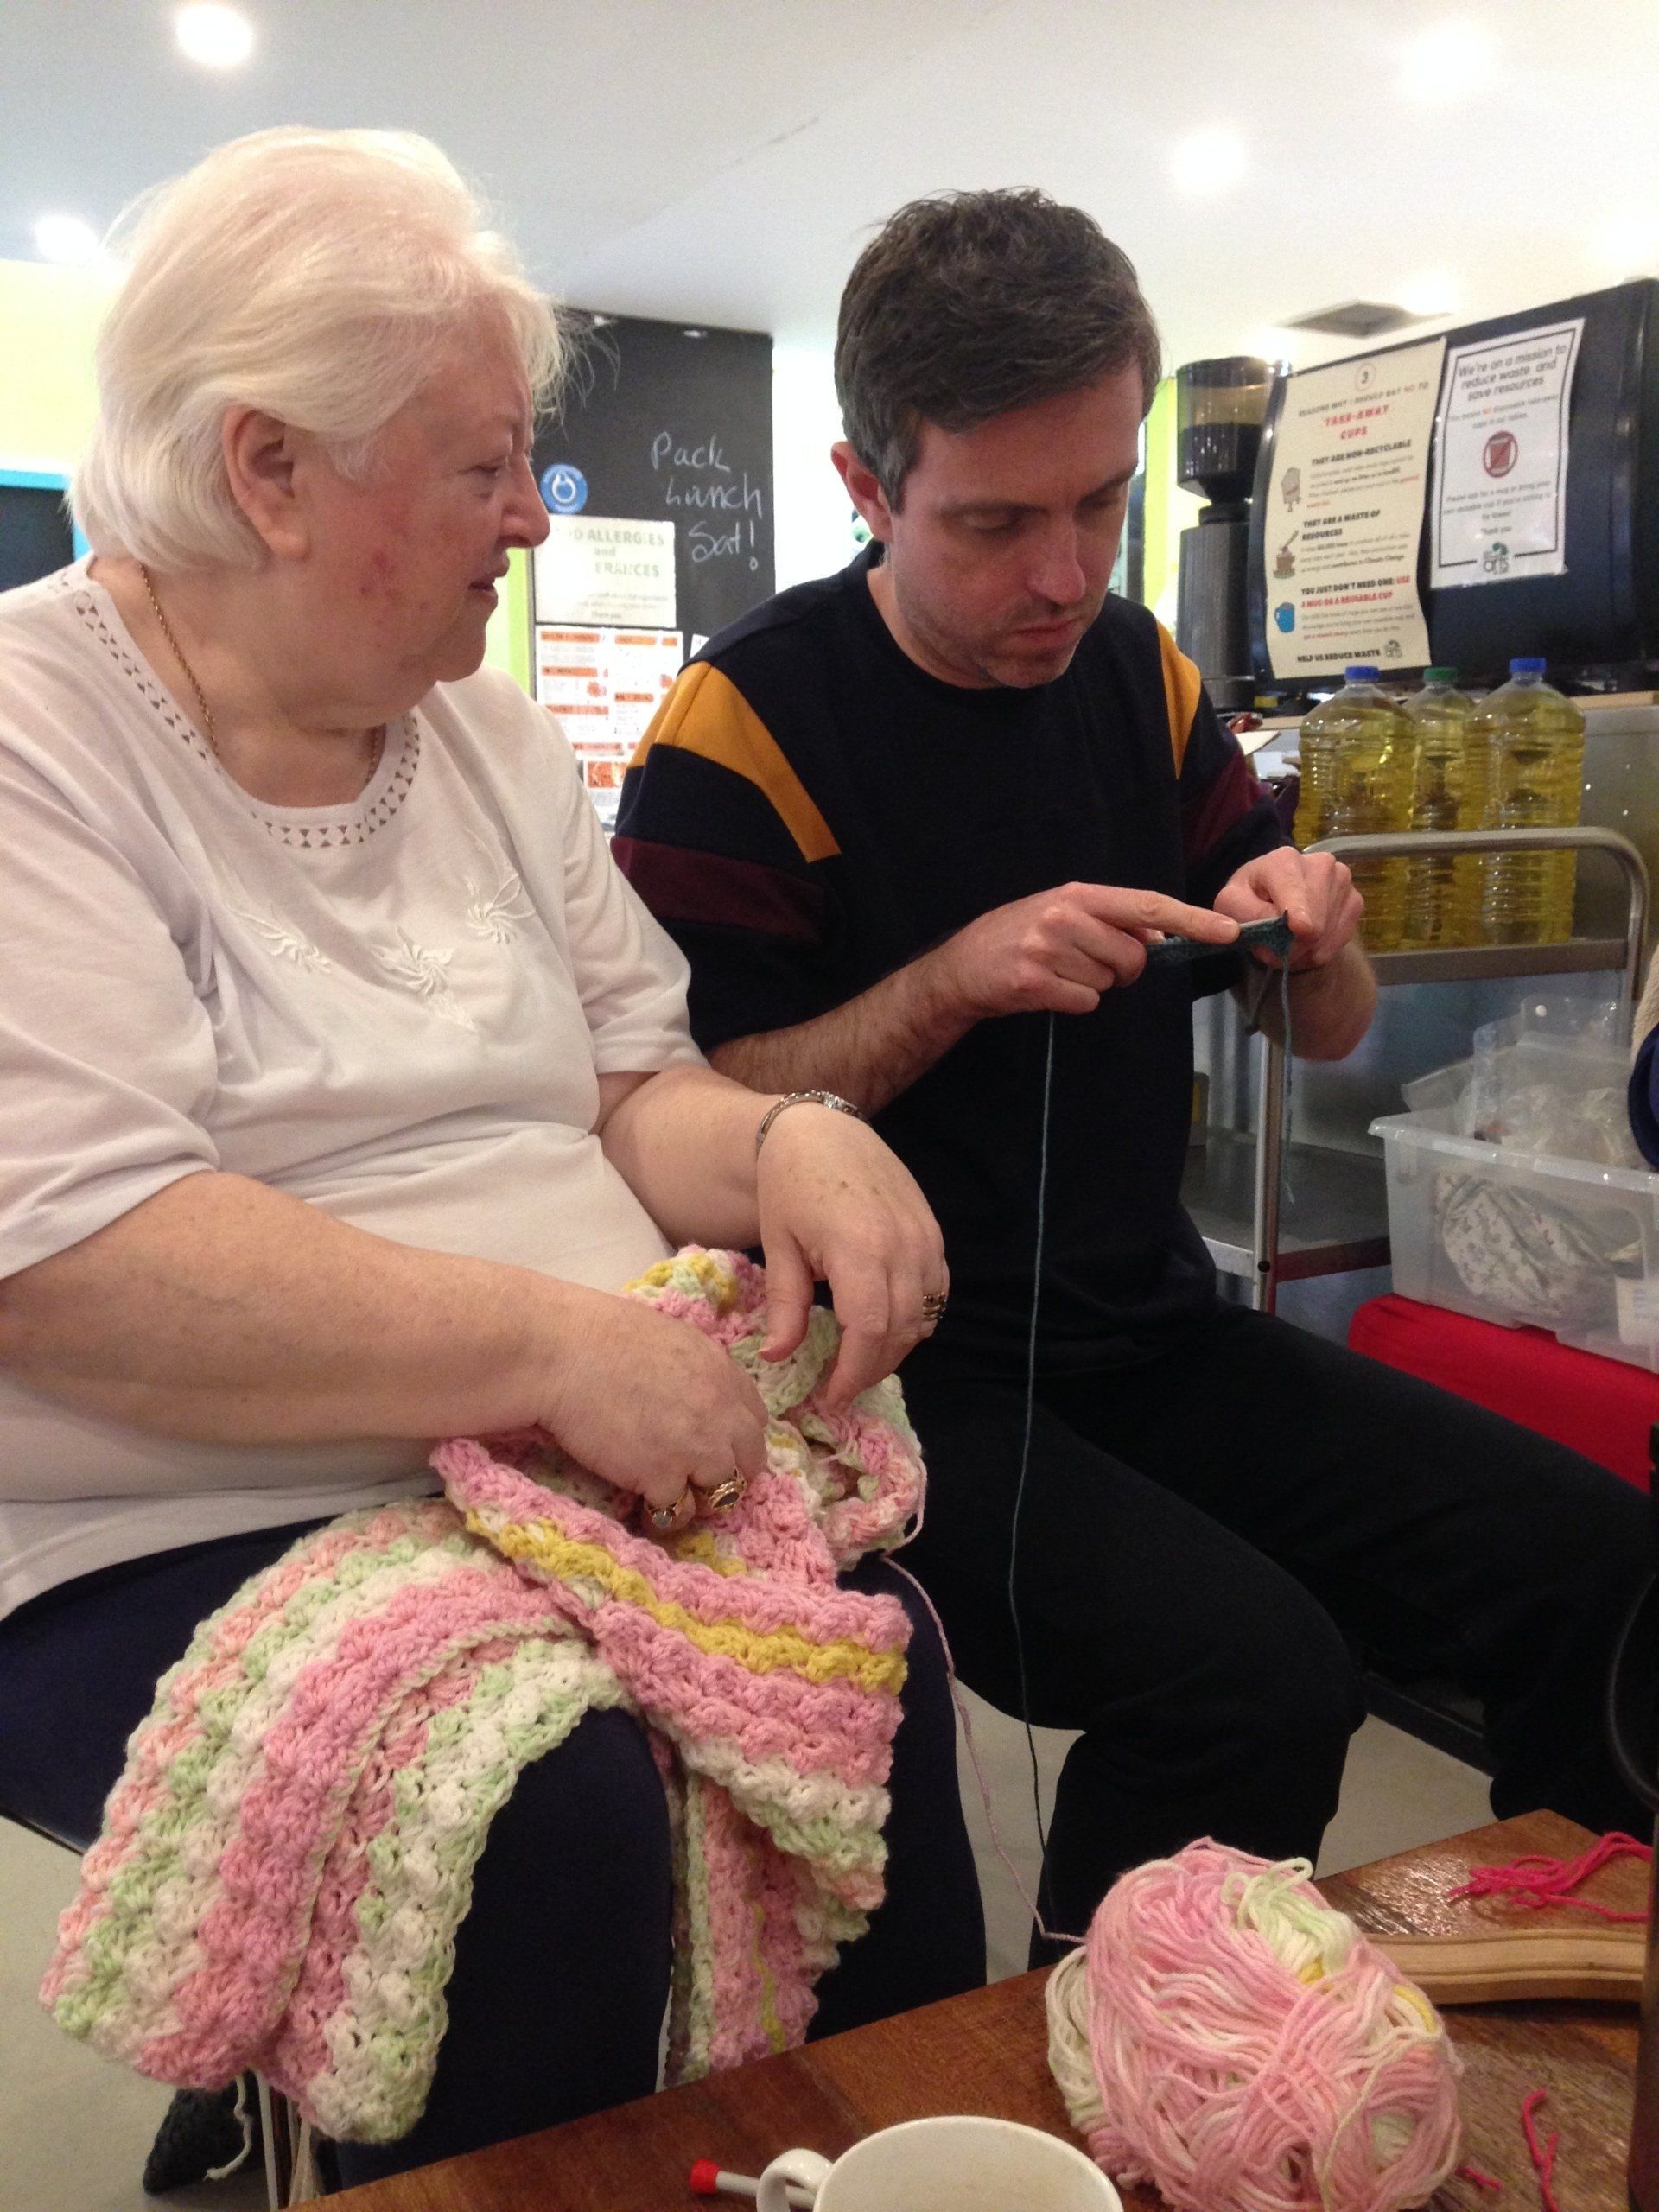 a man and a woman are knitting together at a table .